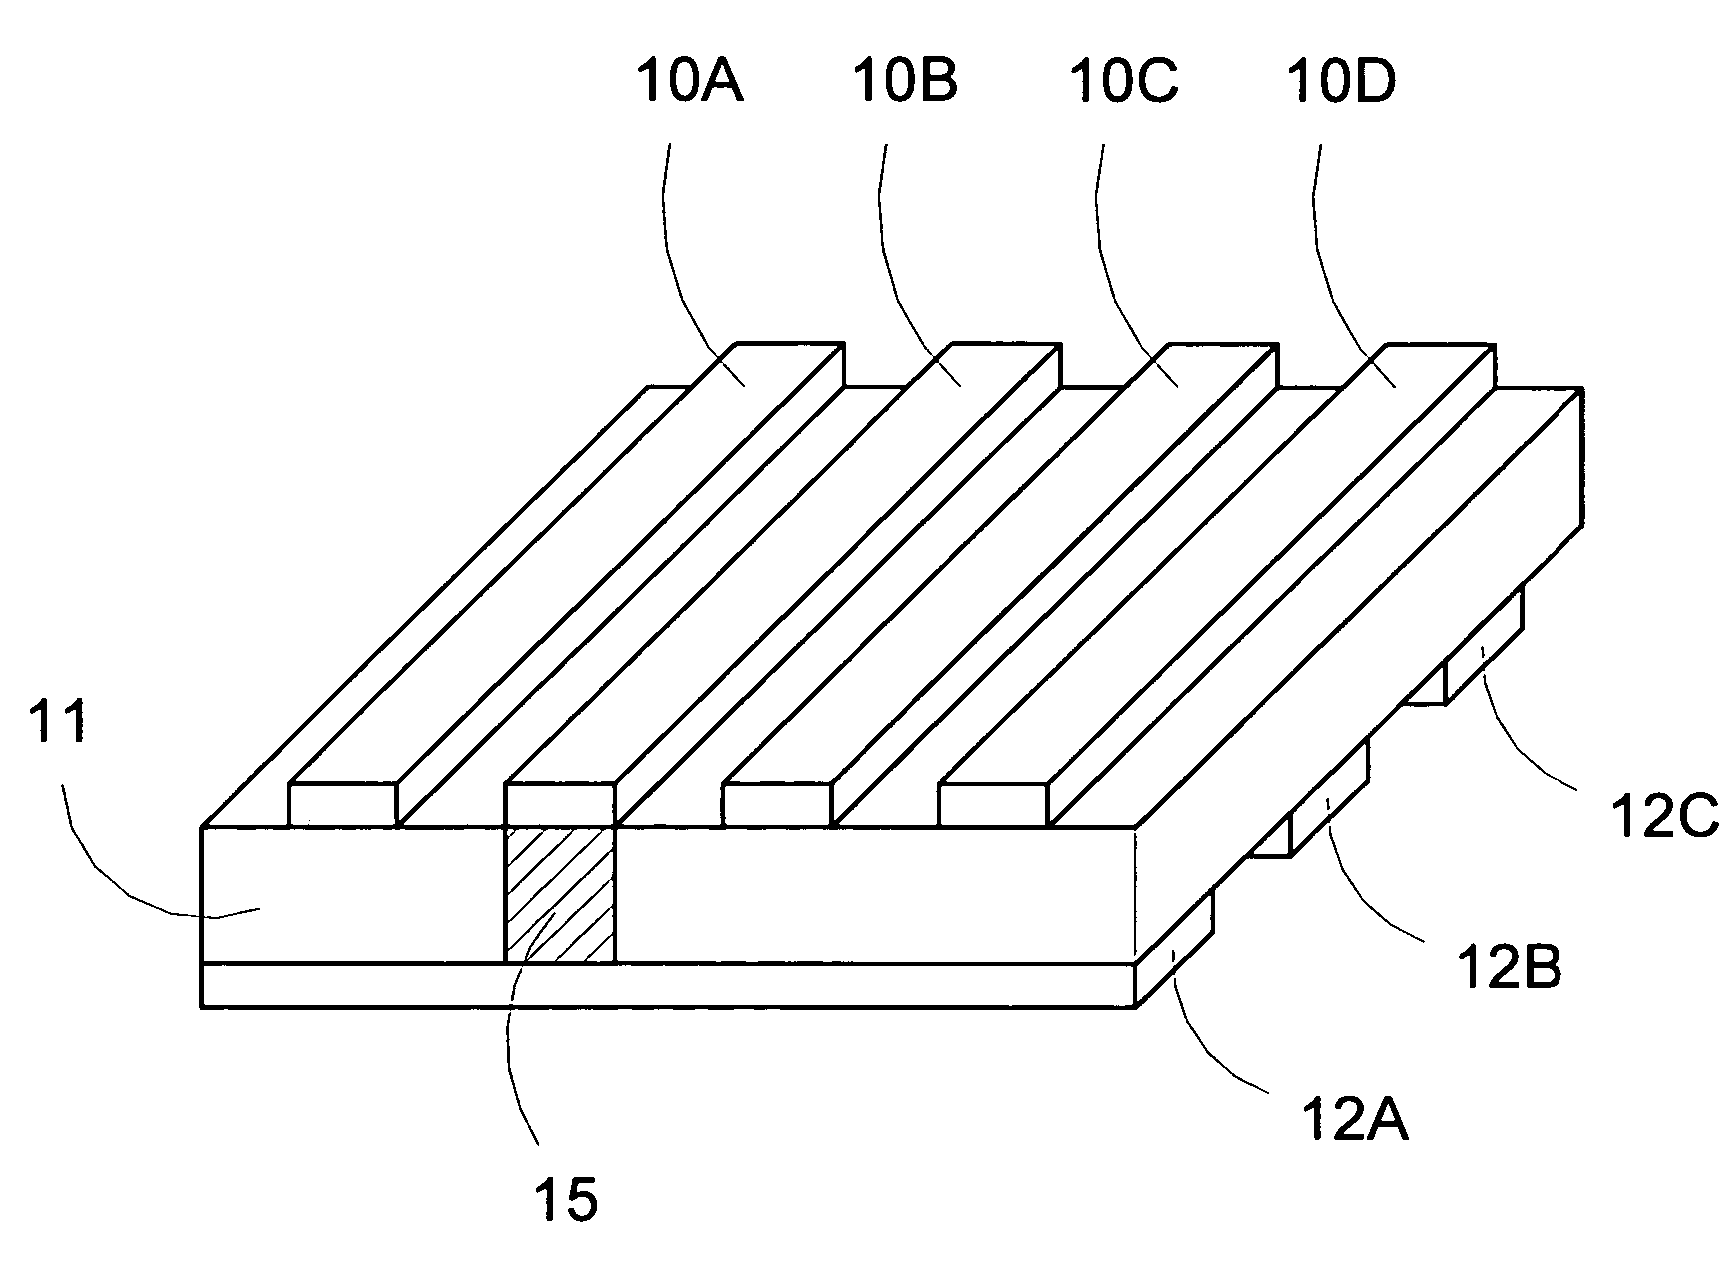 Method to fabricate a thin film non volatile memory device scalable to small sizes